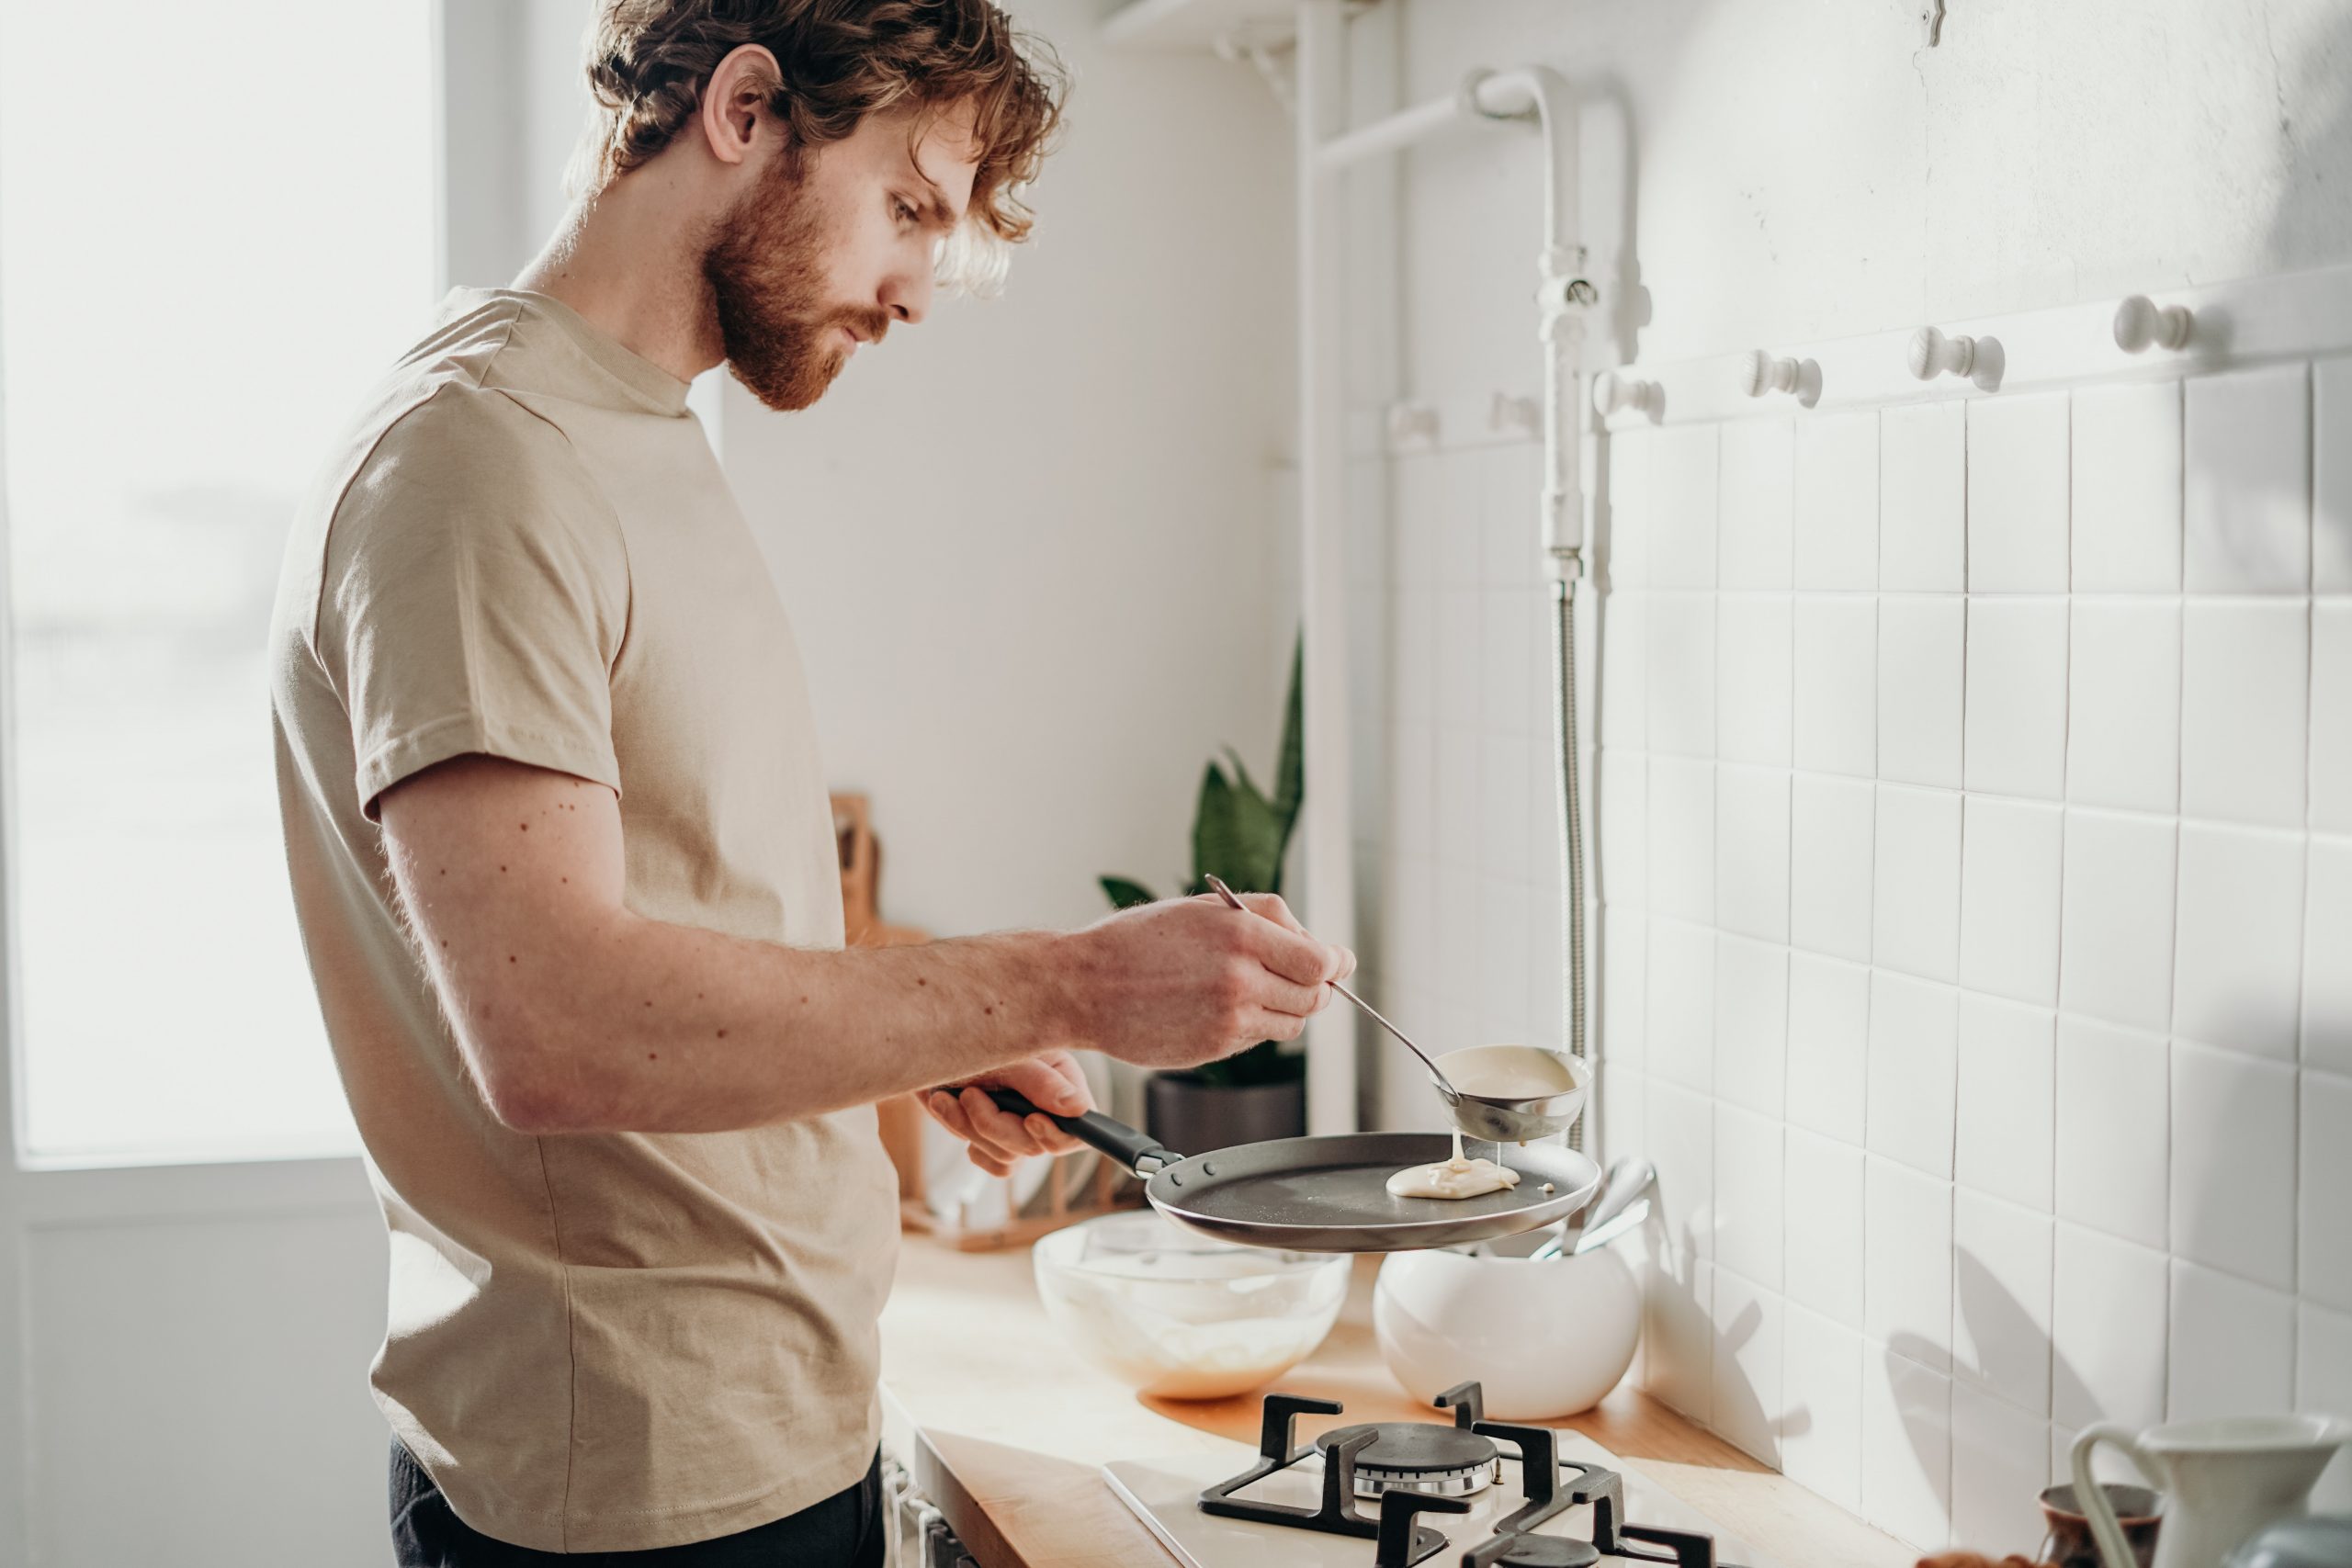 A young white man spoons a ladle of pancake mixture into a frying pan to make pancakes.